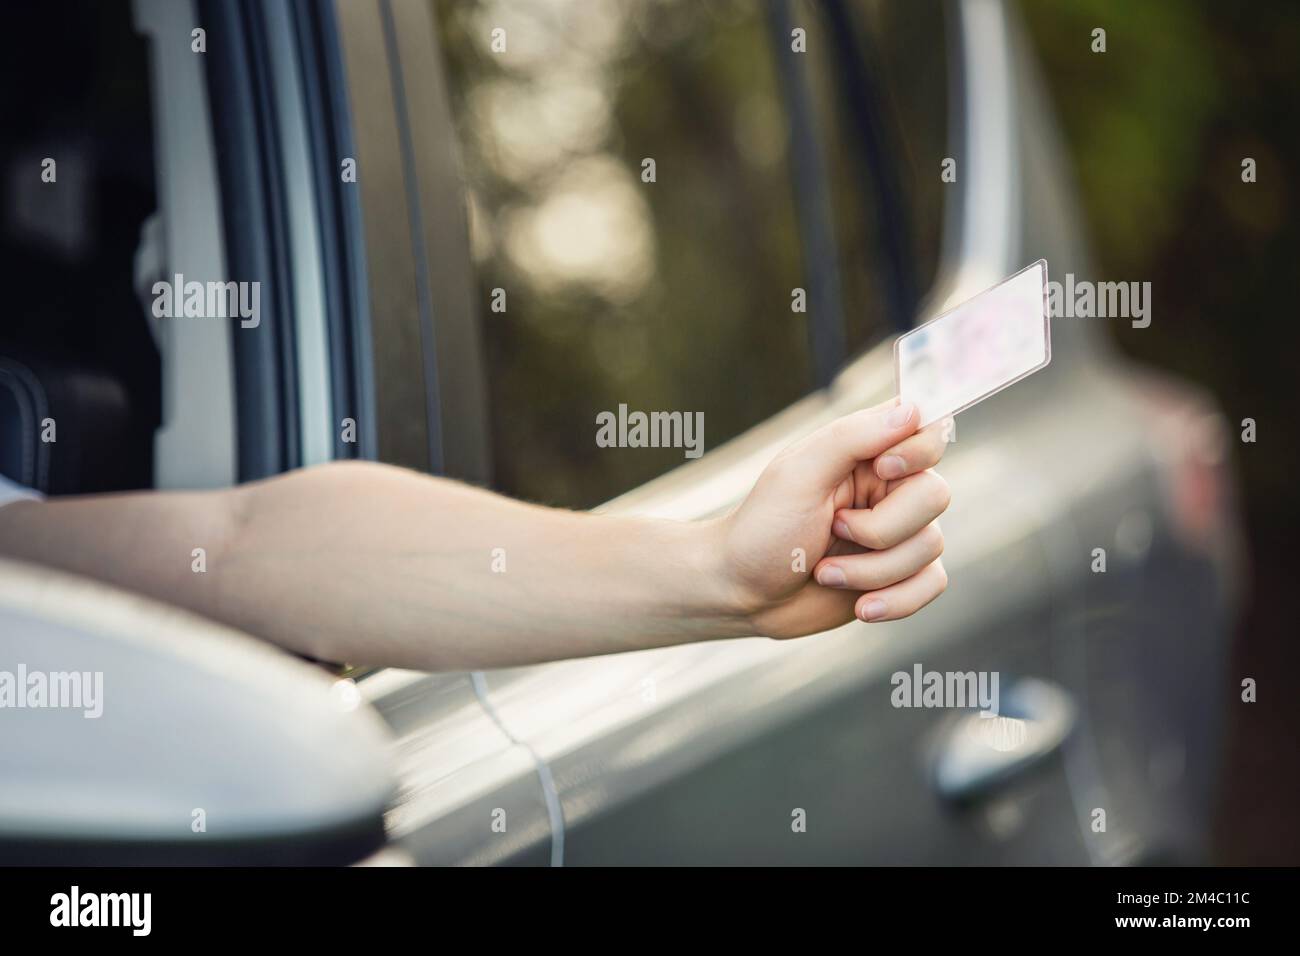 Close up person hand out of the car window holding the driver license as shows it to the police officer for control Stock Photo